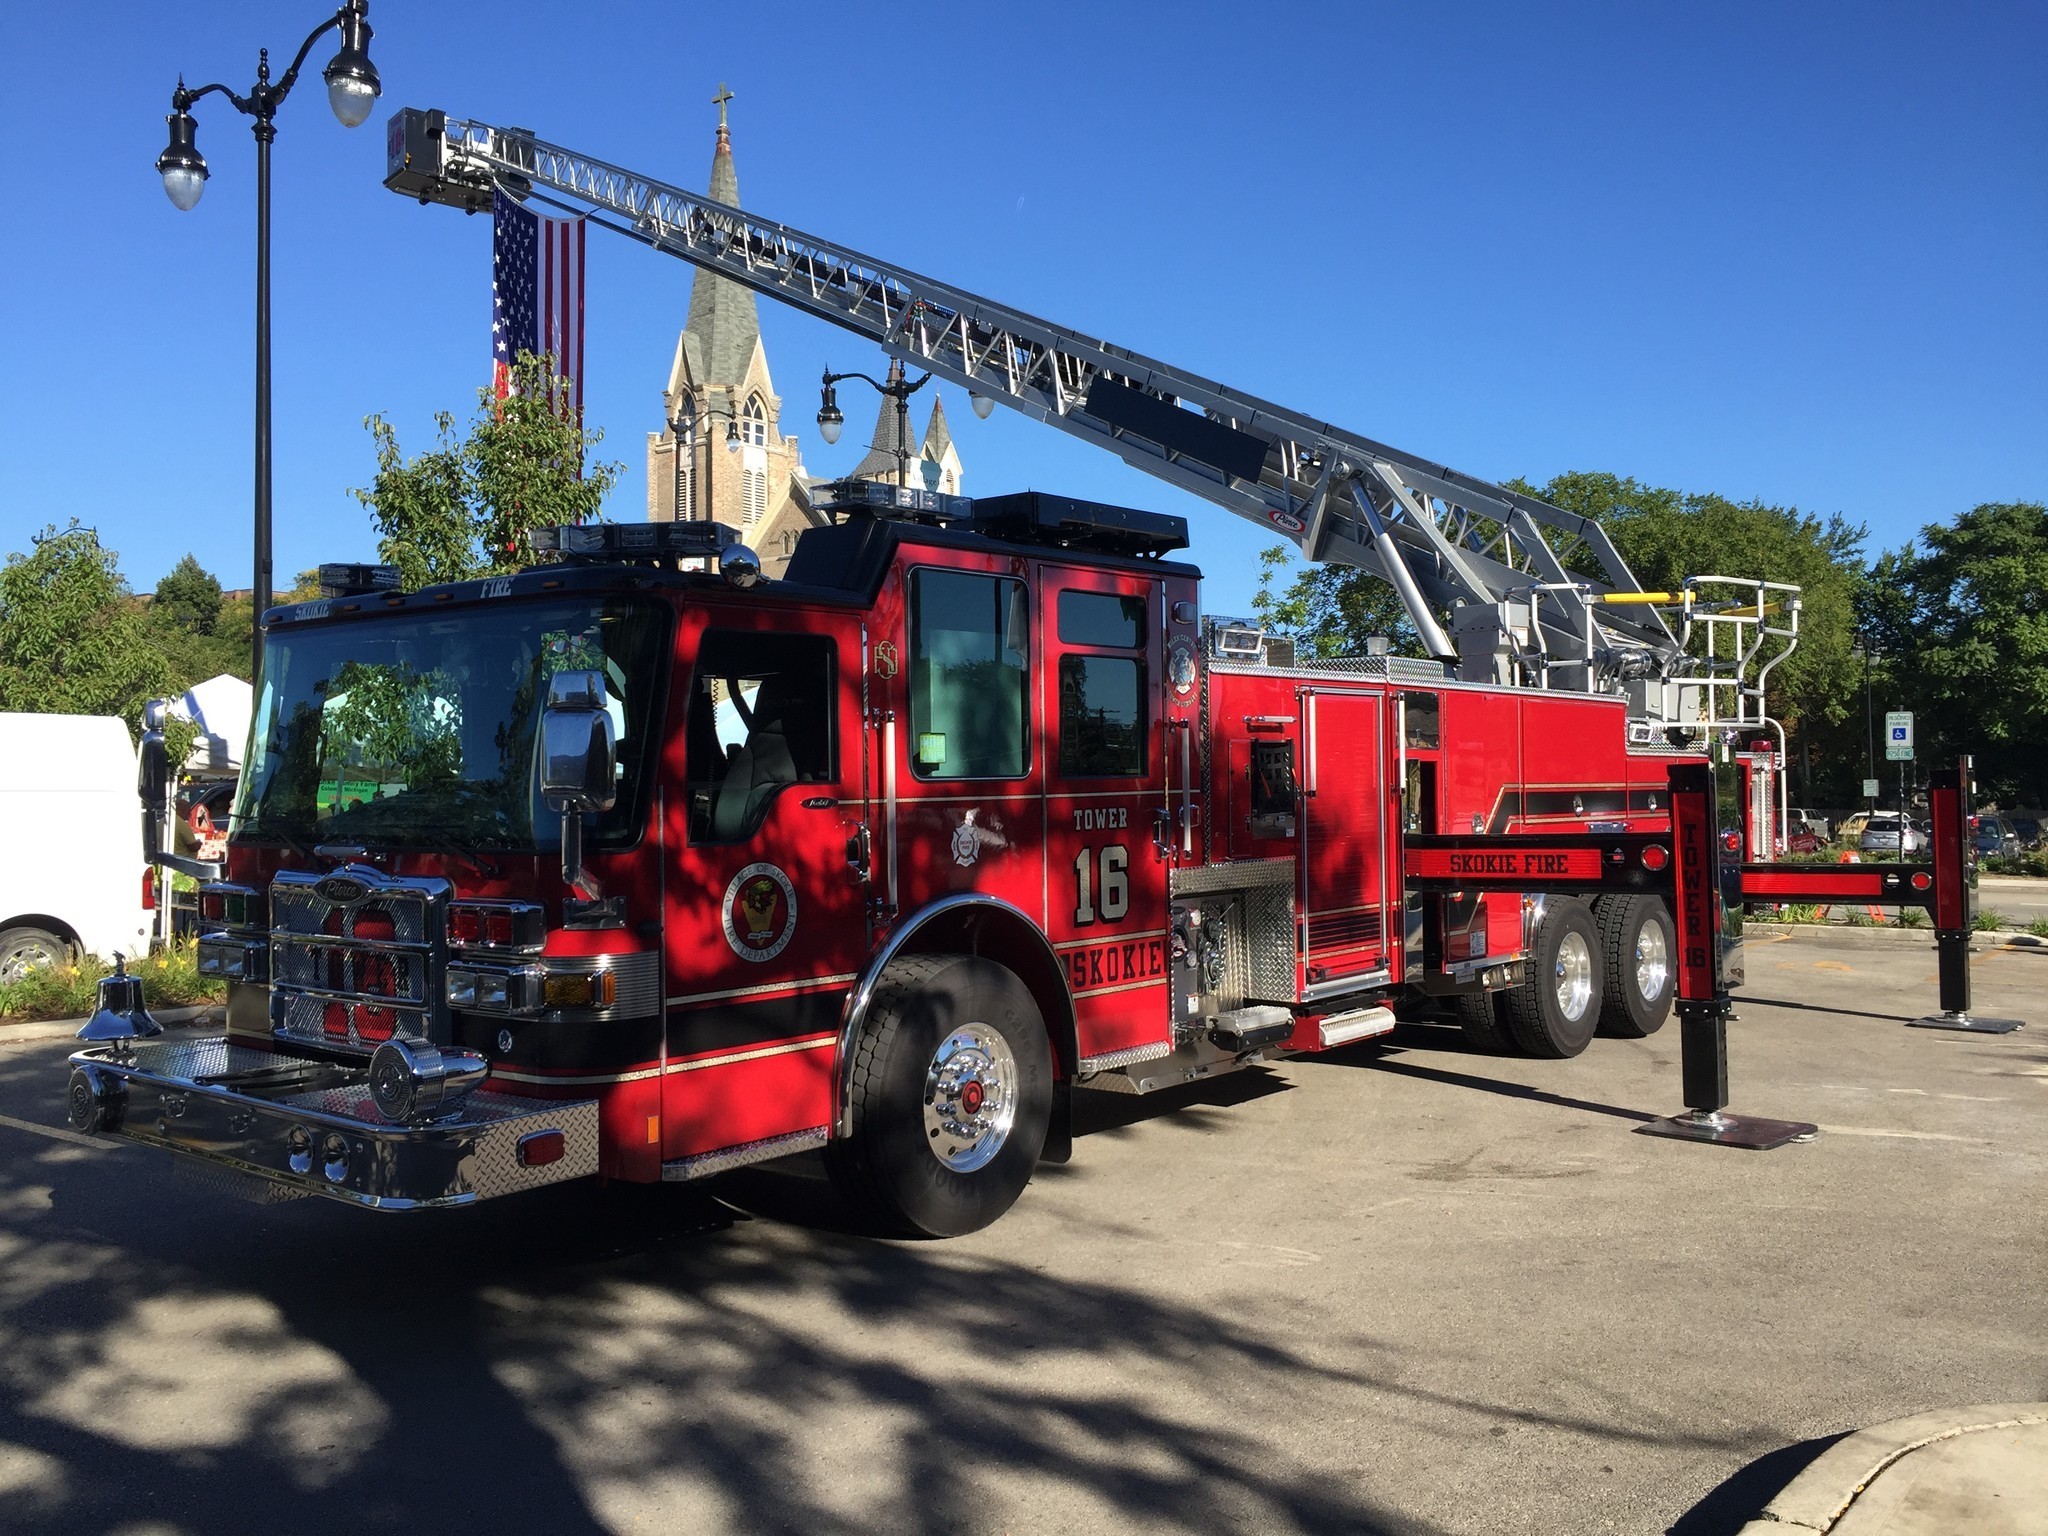 2048x1536 Skokie Fire Department Once Again Achieves Class 1 Rating - Skokie Review